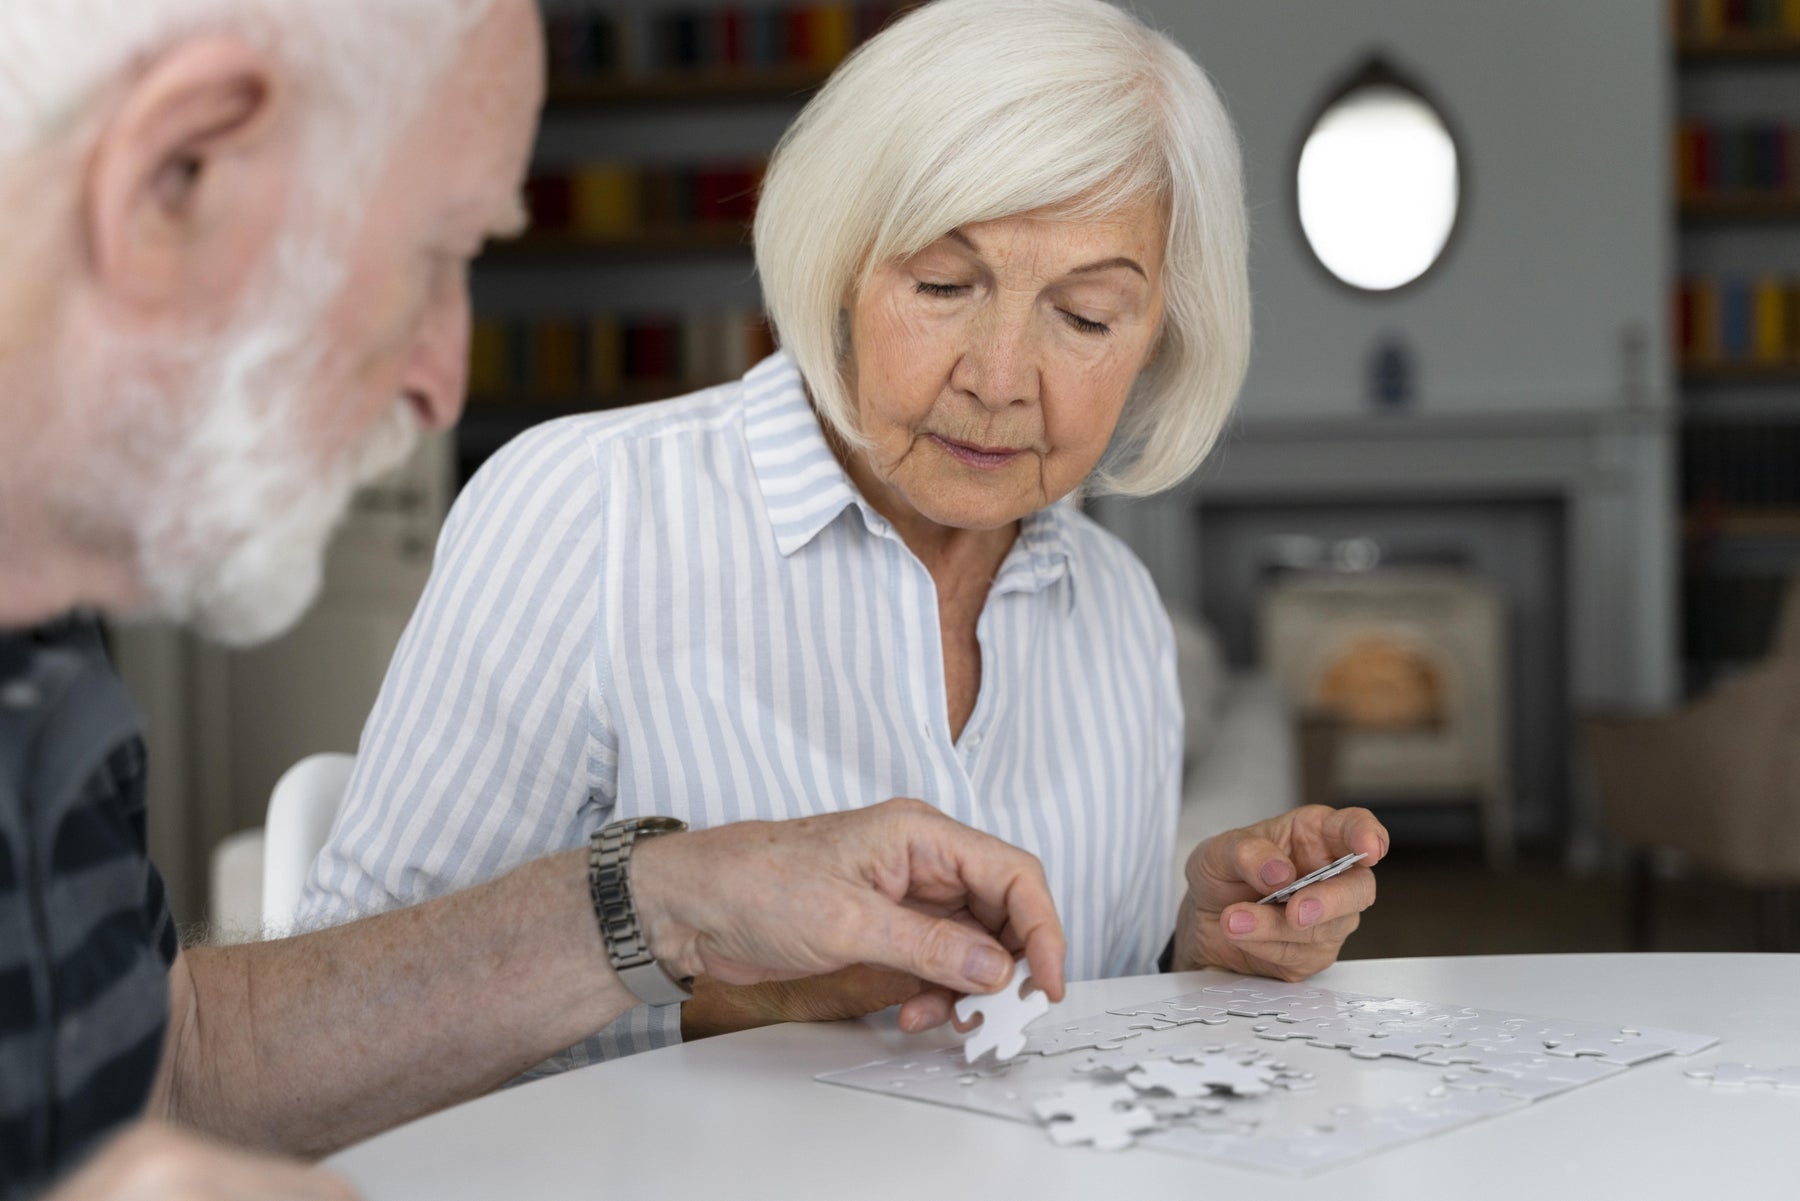 The Benefits of Jigsaw Puzzles for Dementia and Alzheimer's: How Puzzles Can Improve Cognitive Function and Quality of Life